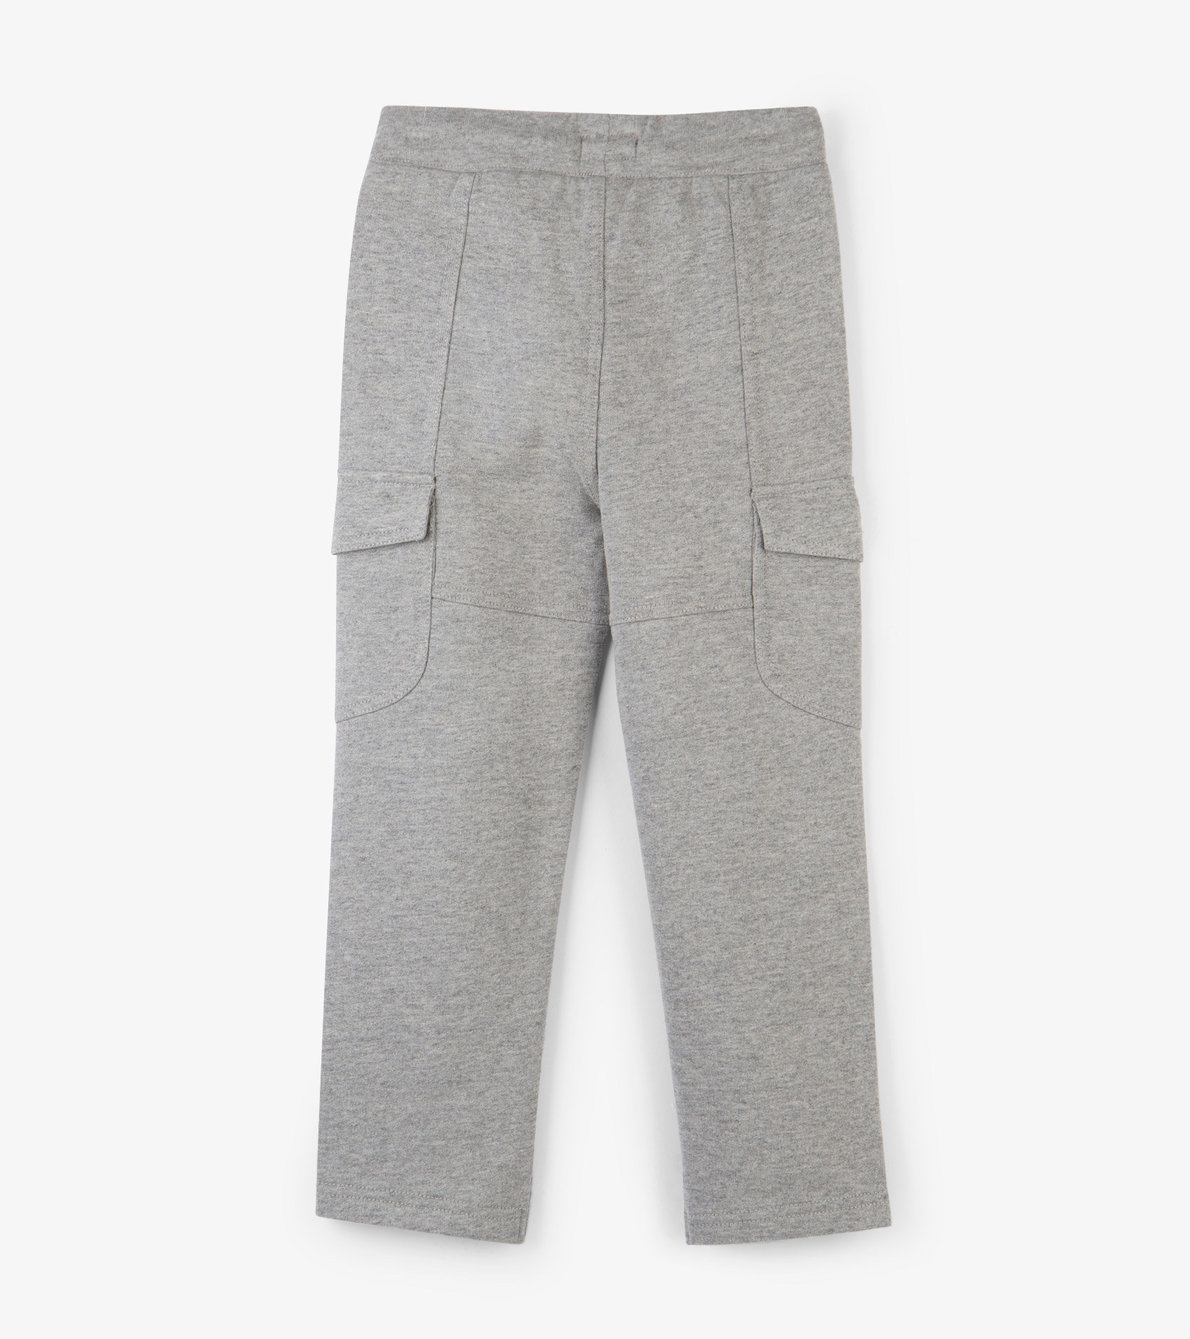 View larger image of Grey Cargo Joggers